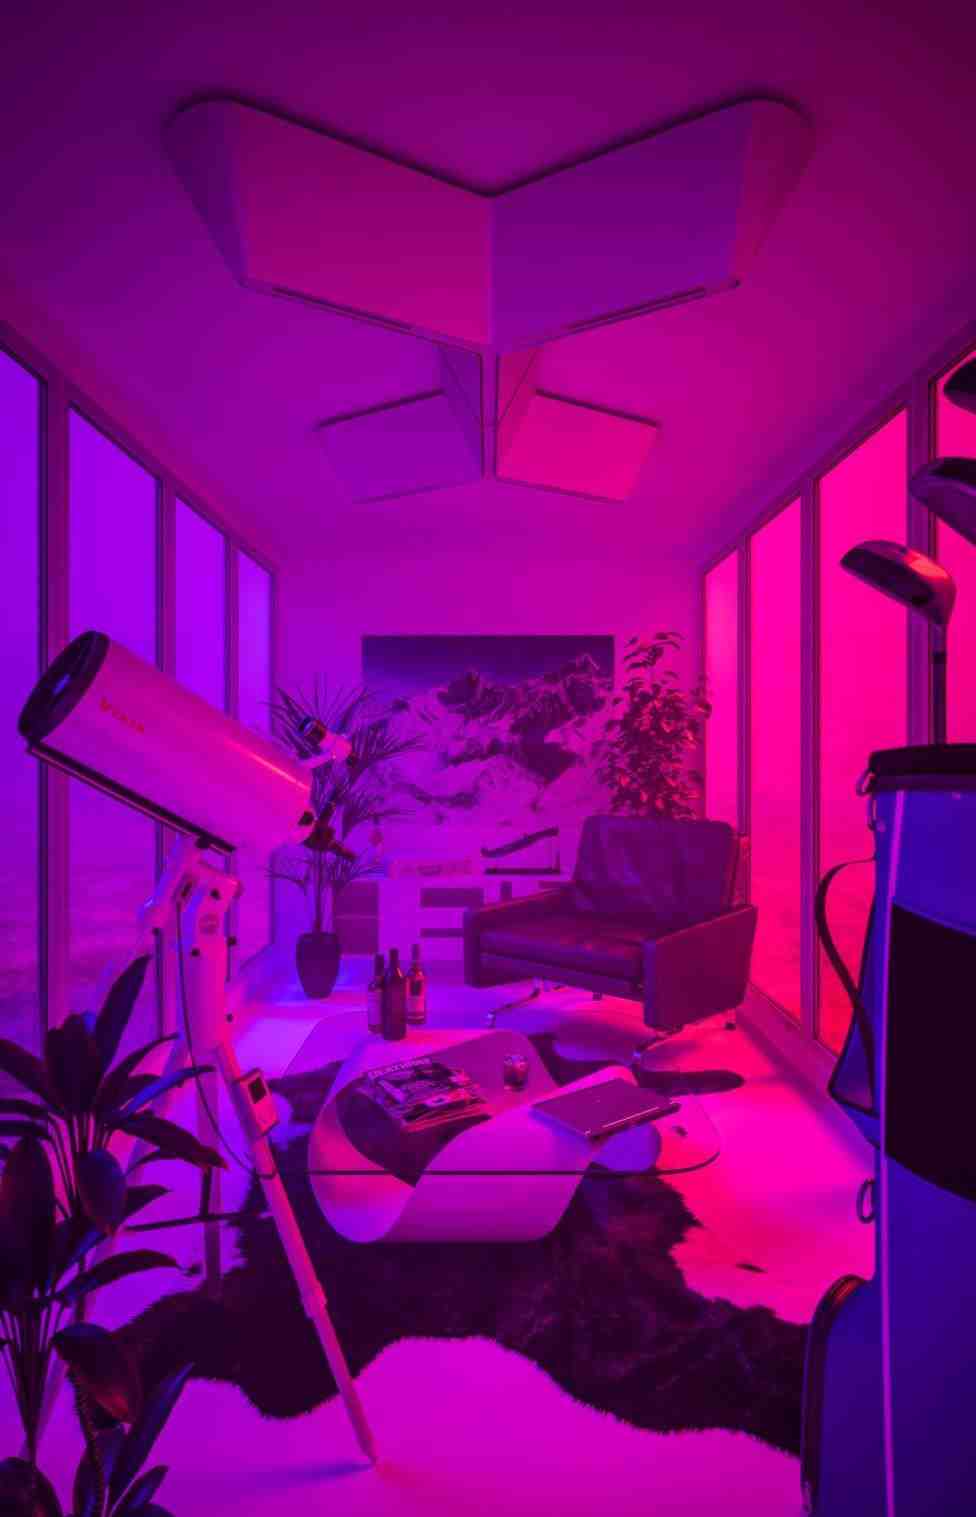 A purple lit room with a telescope and potted plants - Magenta